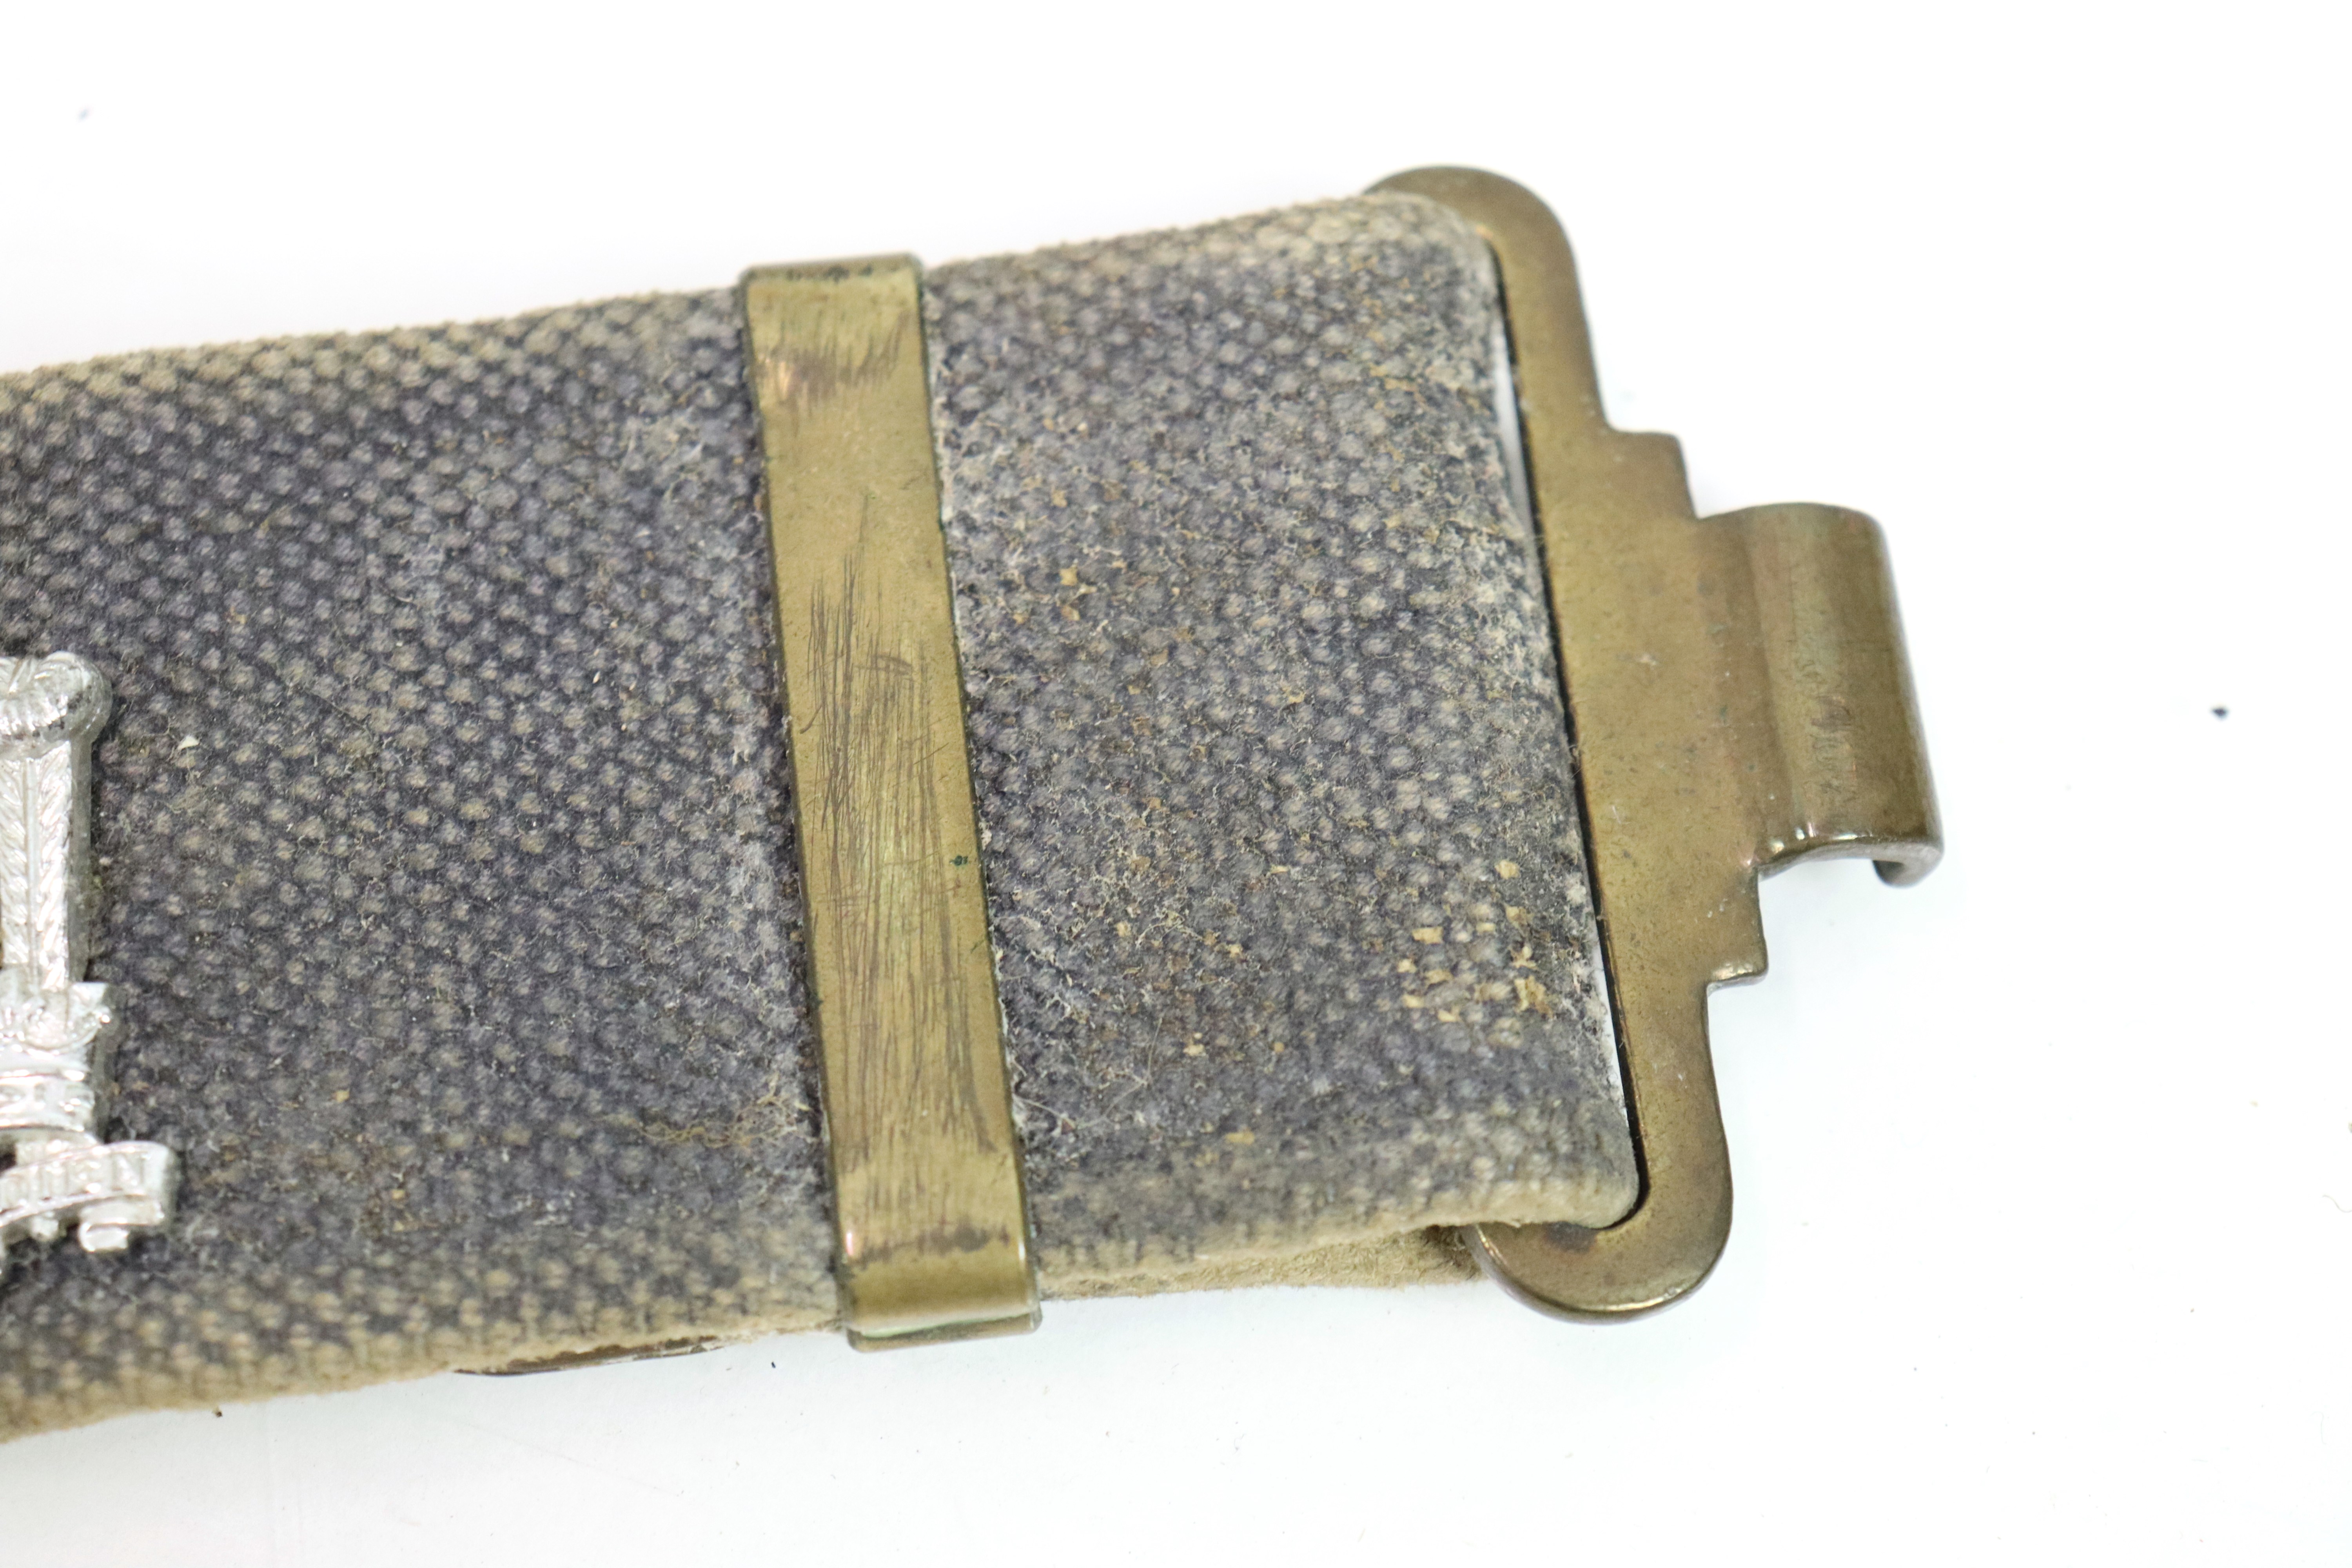 Two 37 patt belts displaying a collection of milit - Image 12 of 24